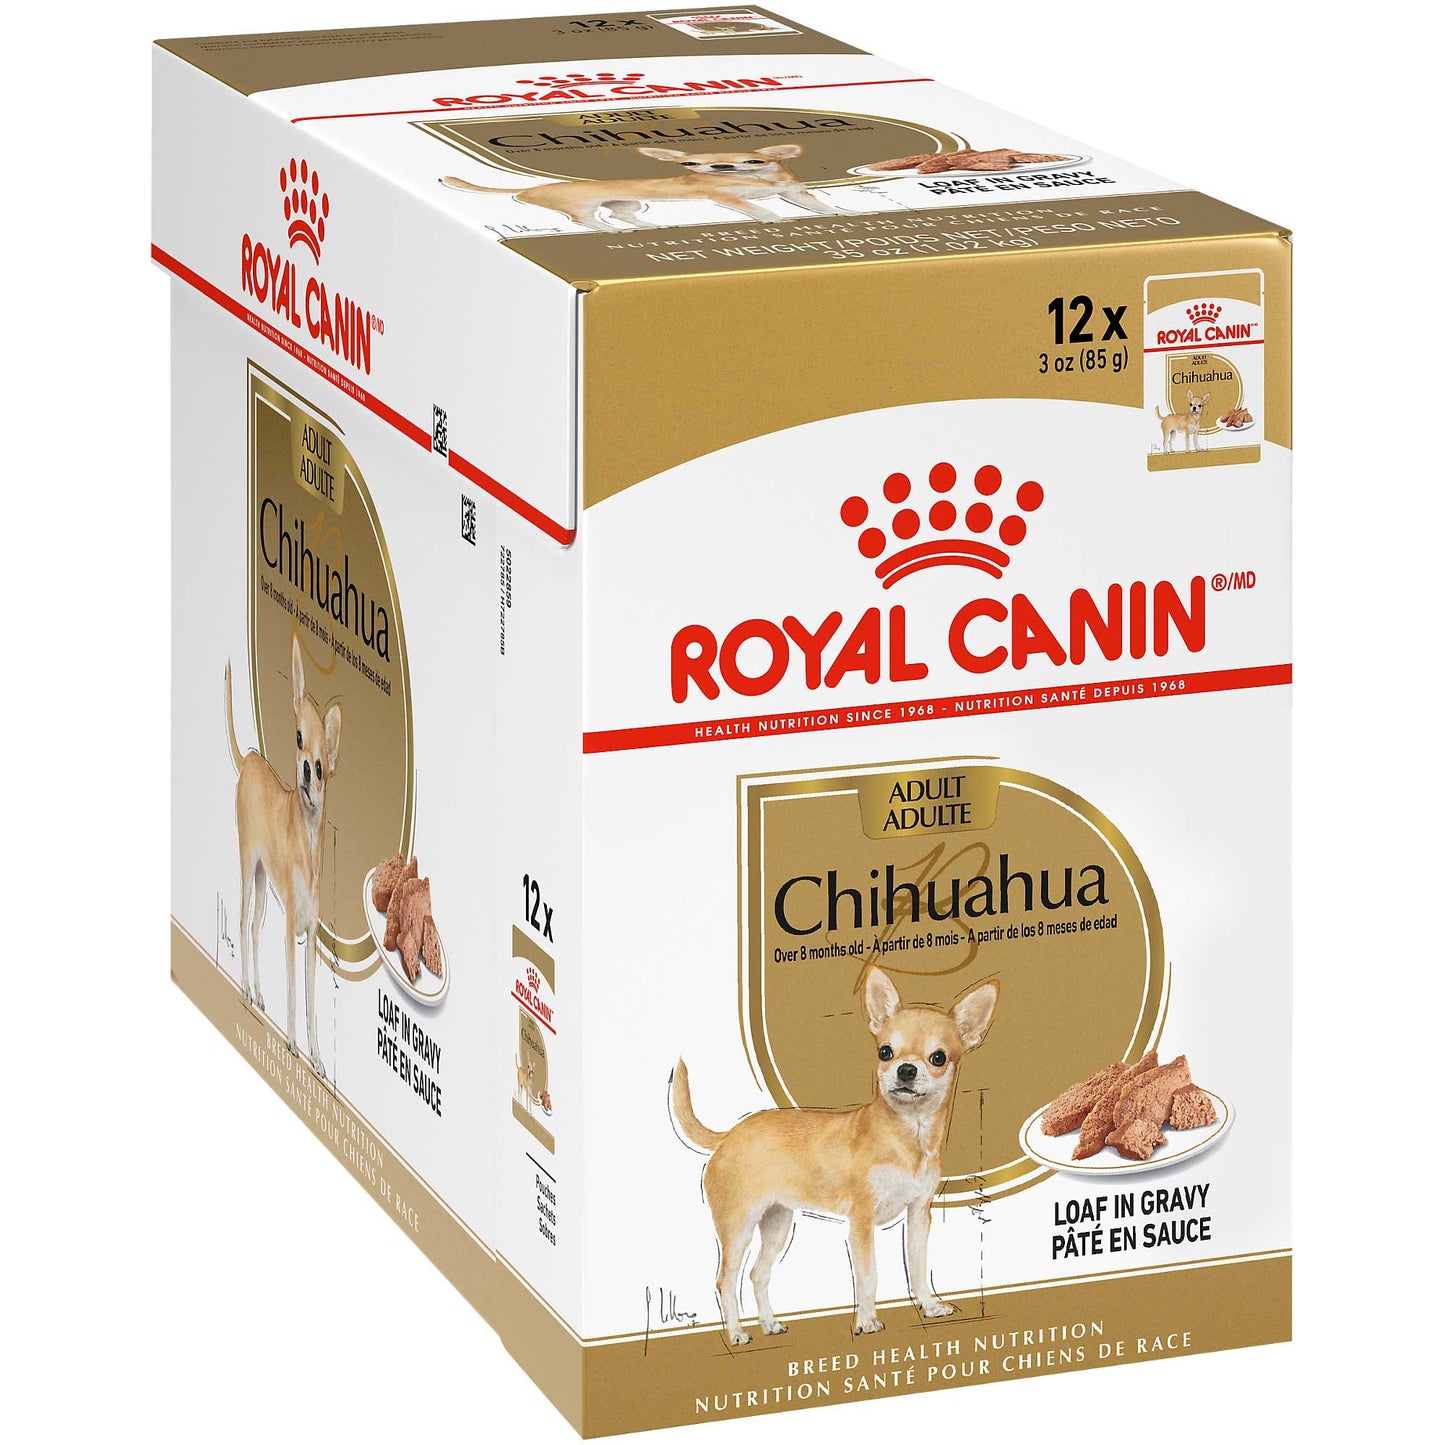 Royal Canin Chihuahua From 8 Months to Adult & Mature 12 X 85g